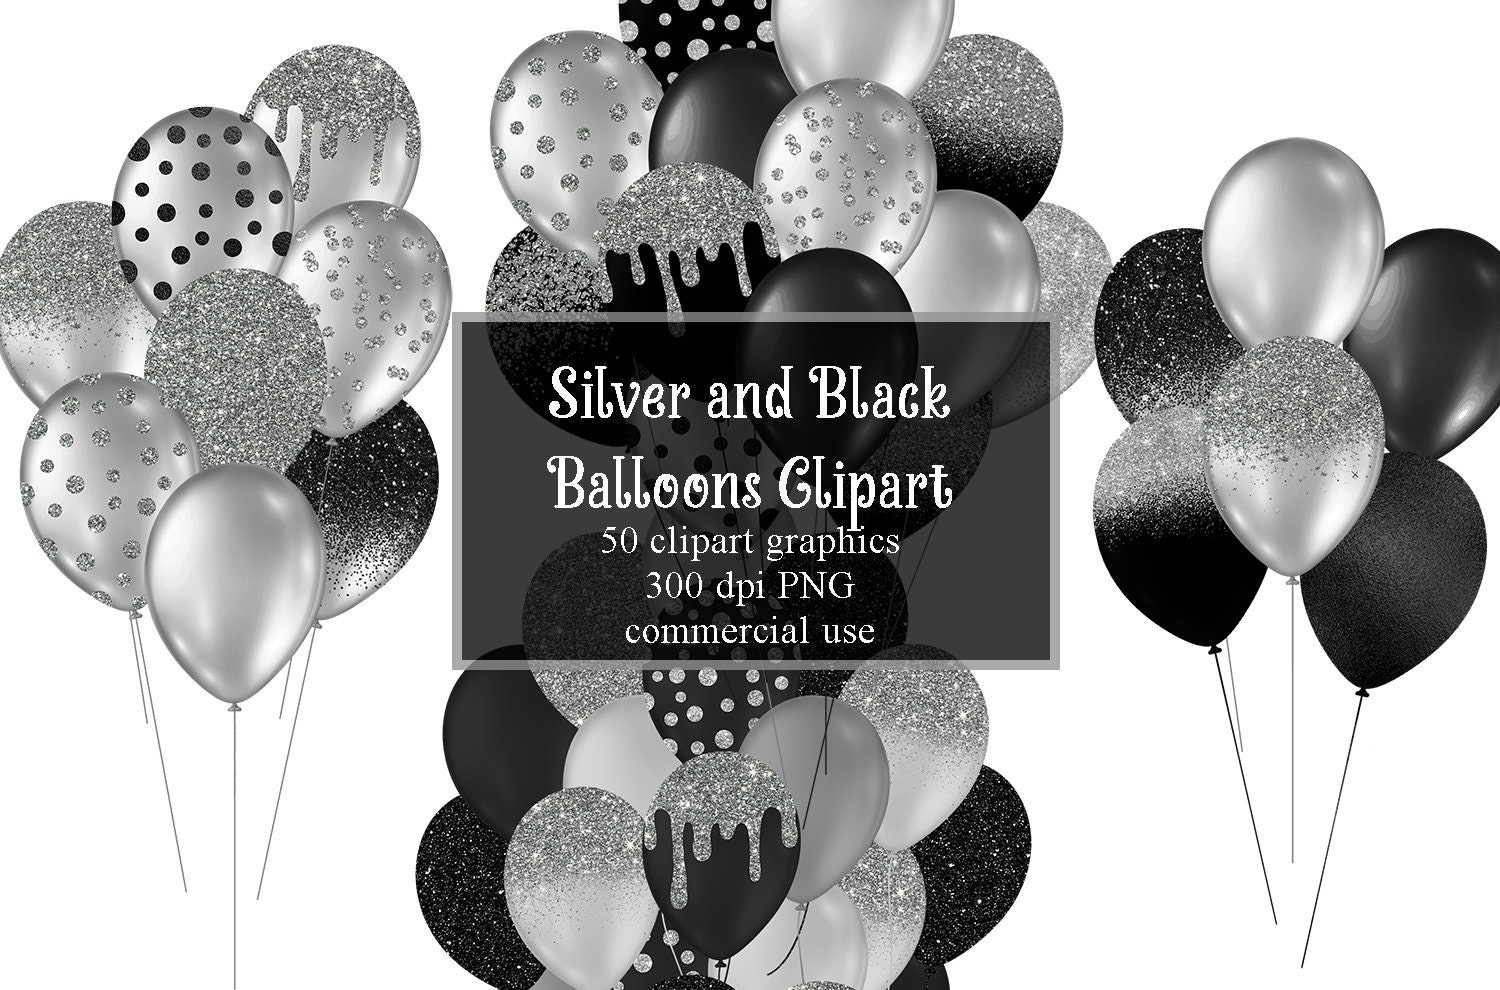 Black and Silver Party Decorations Clipart Graphic by Digital